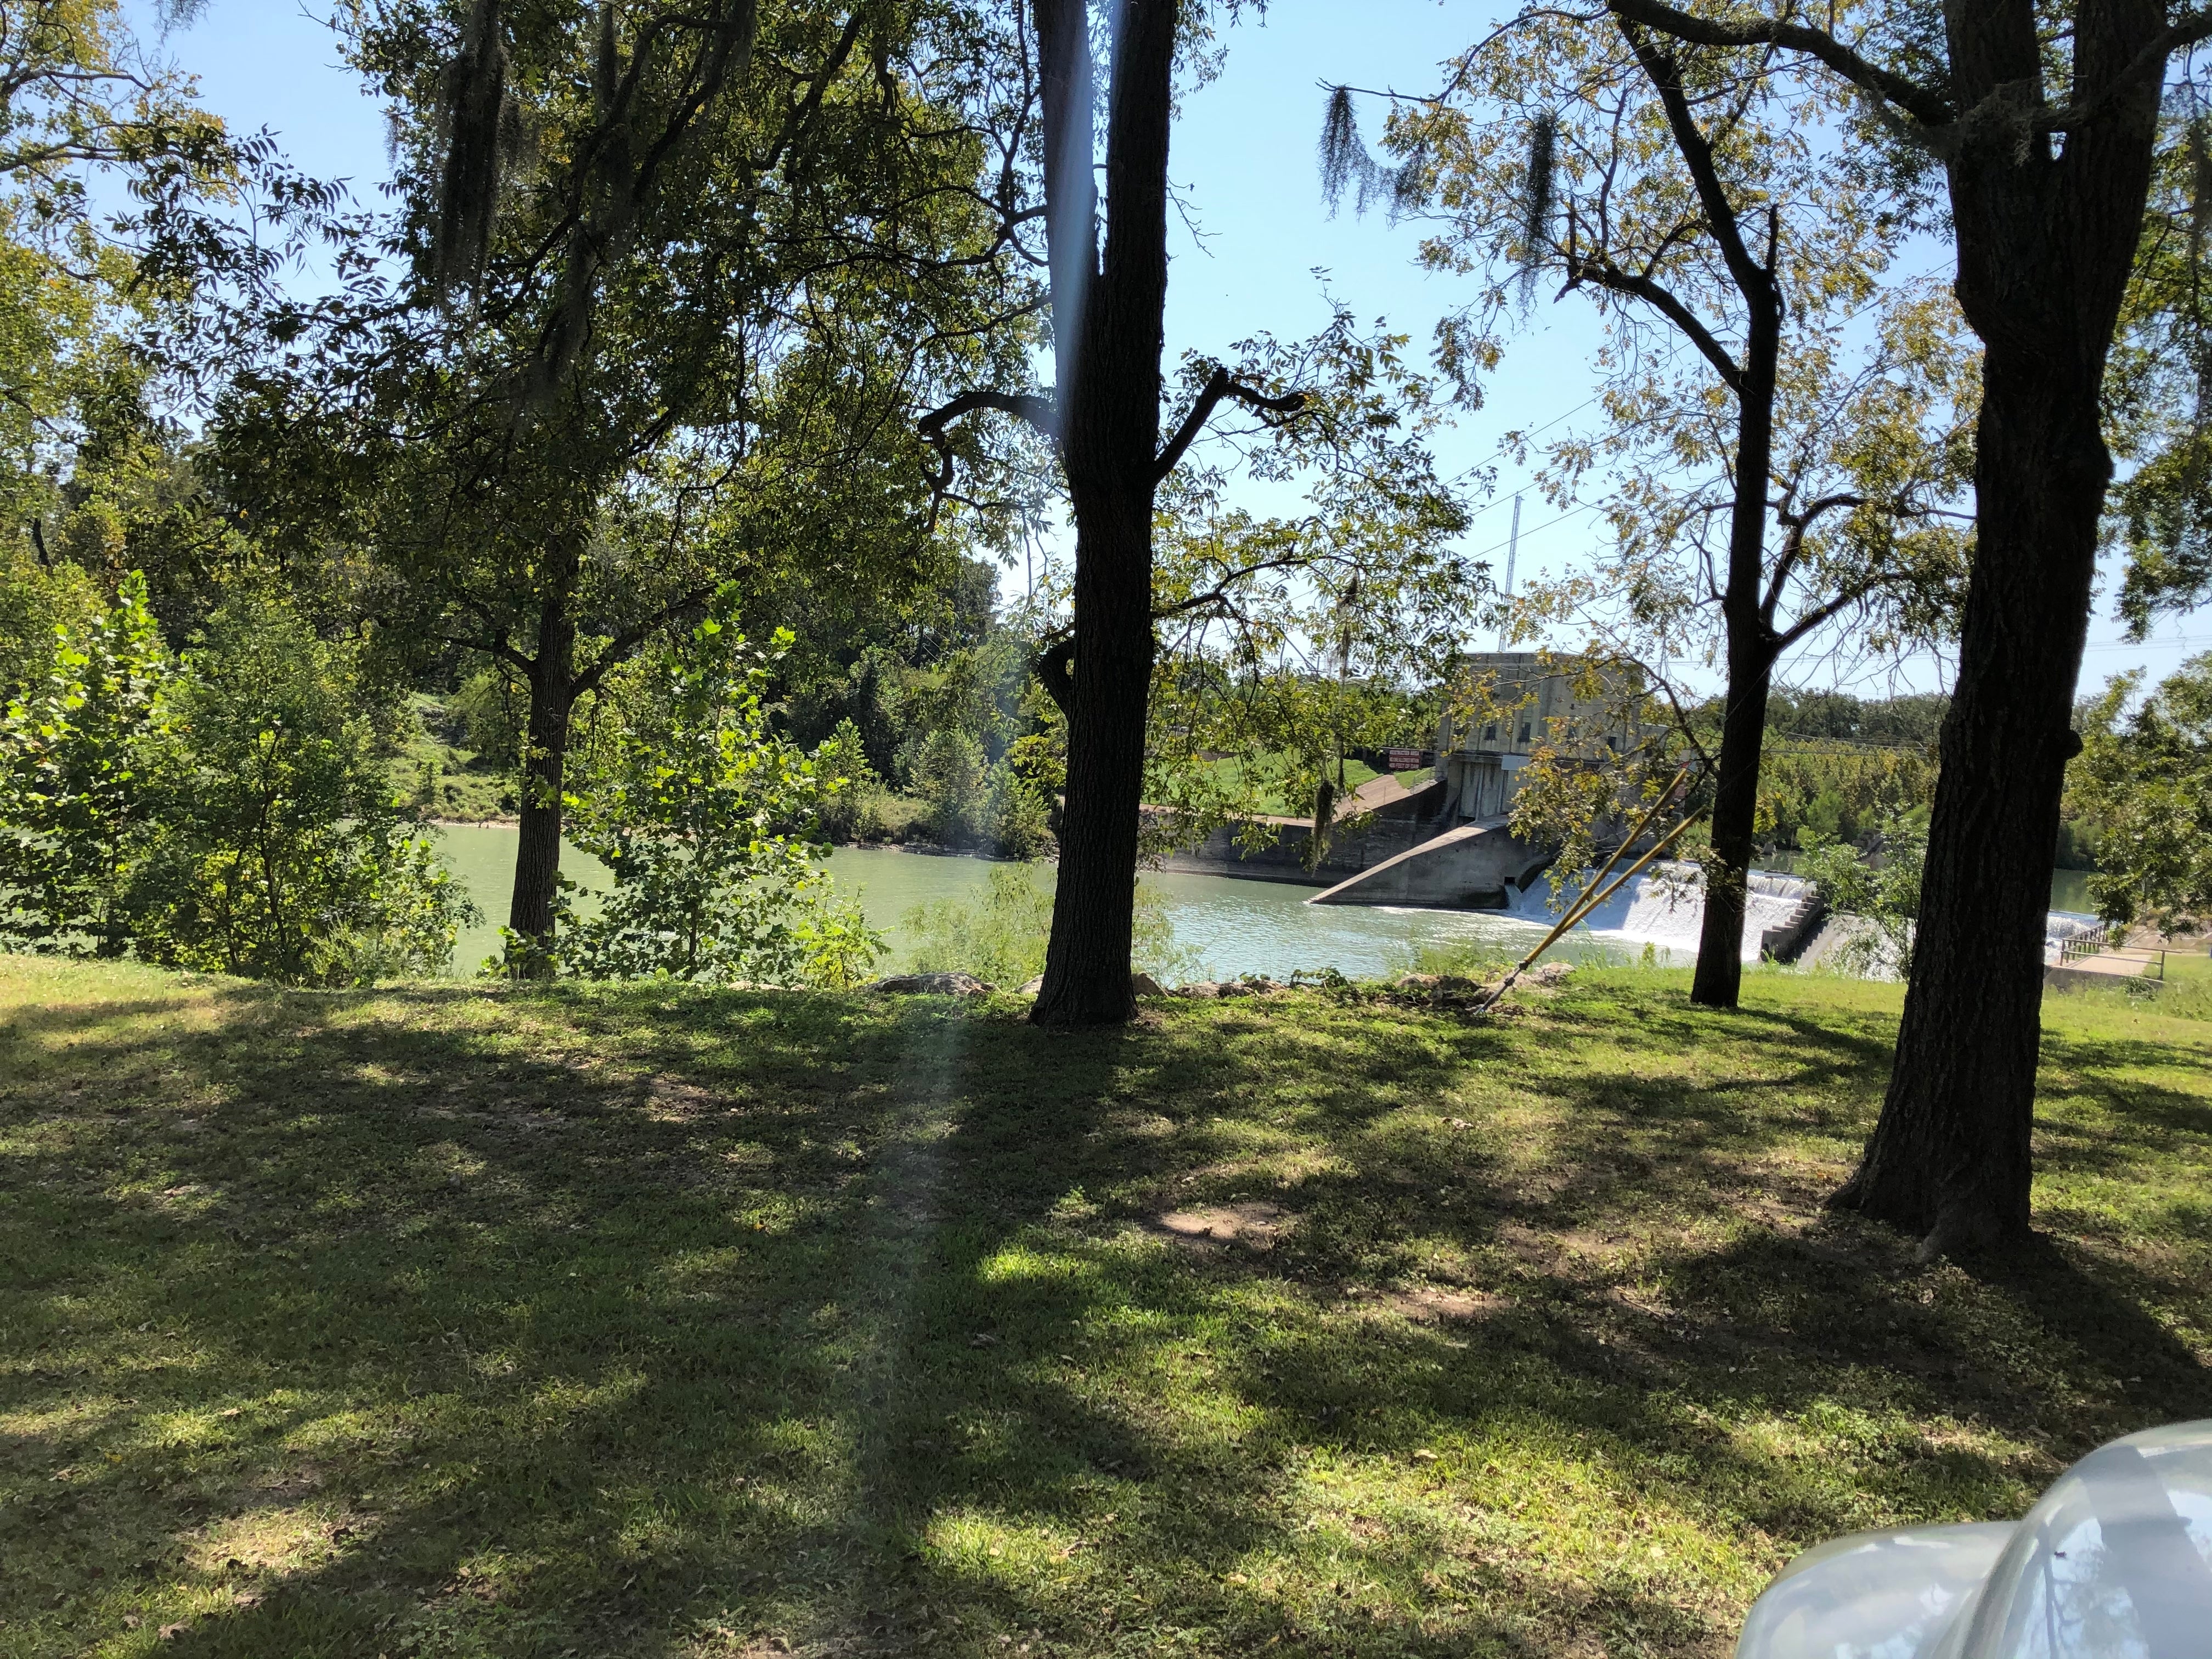 Camper submitted image from Lake Wood Recreation Area - 2